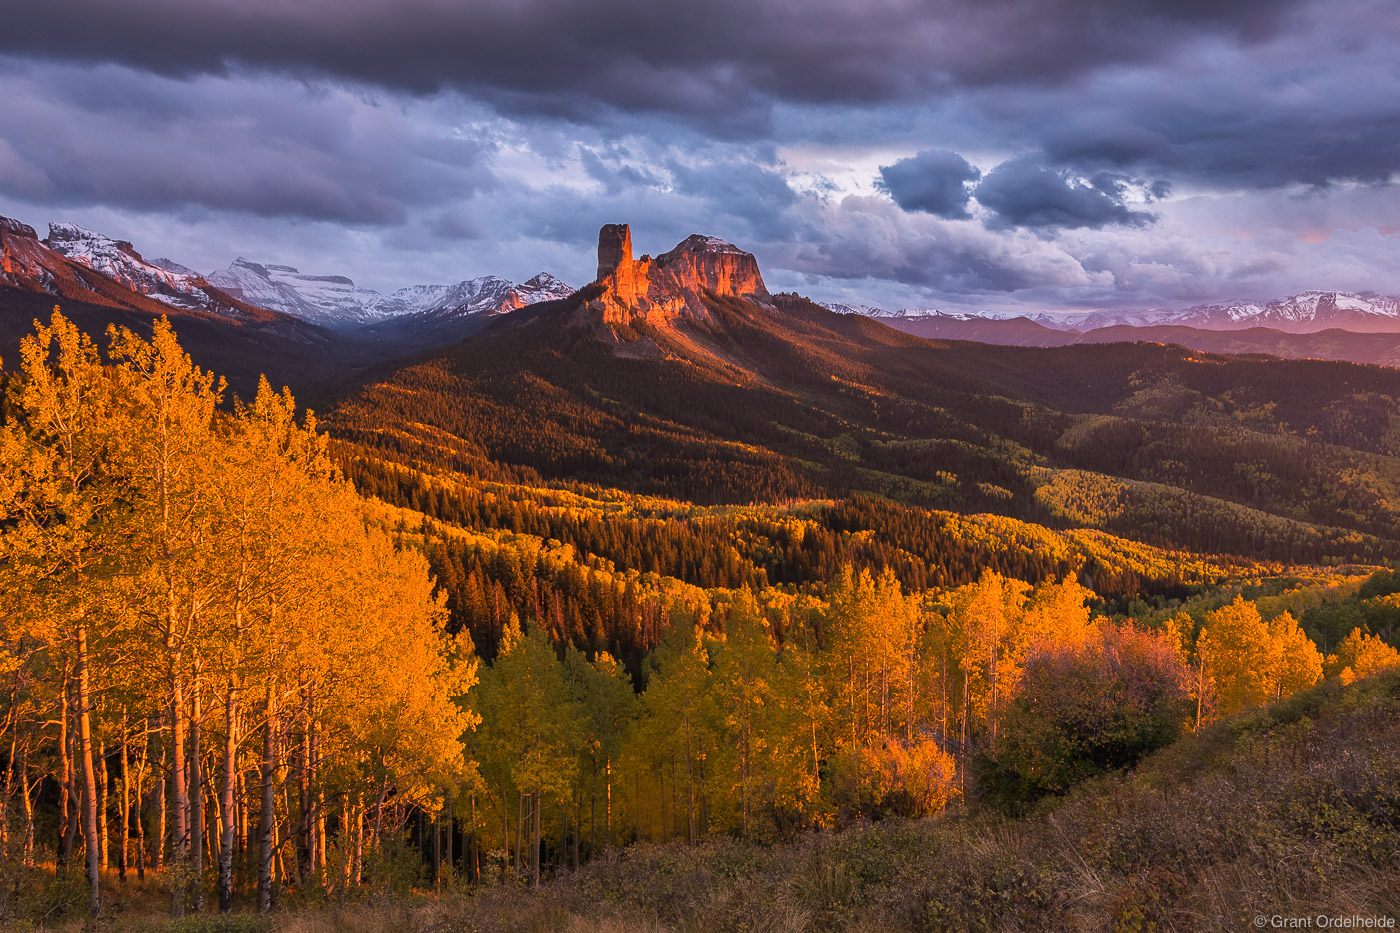 An autumn sunset over Chimney Rock and Courthouse Mountain near Ridgway Colorado.